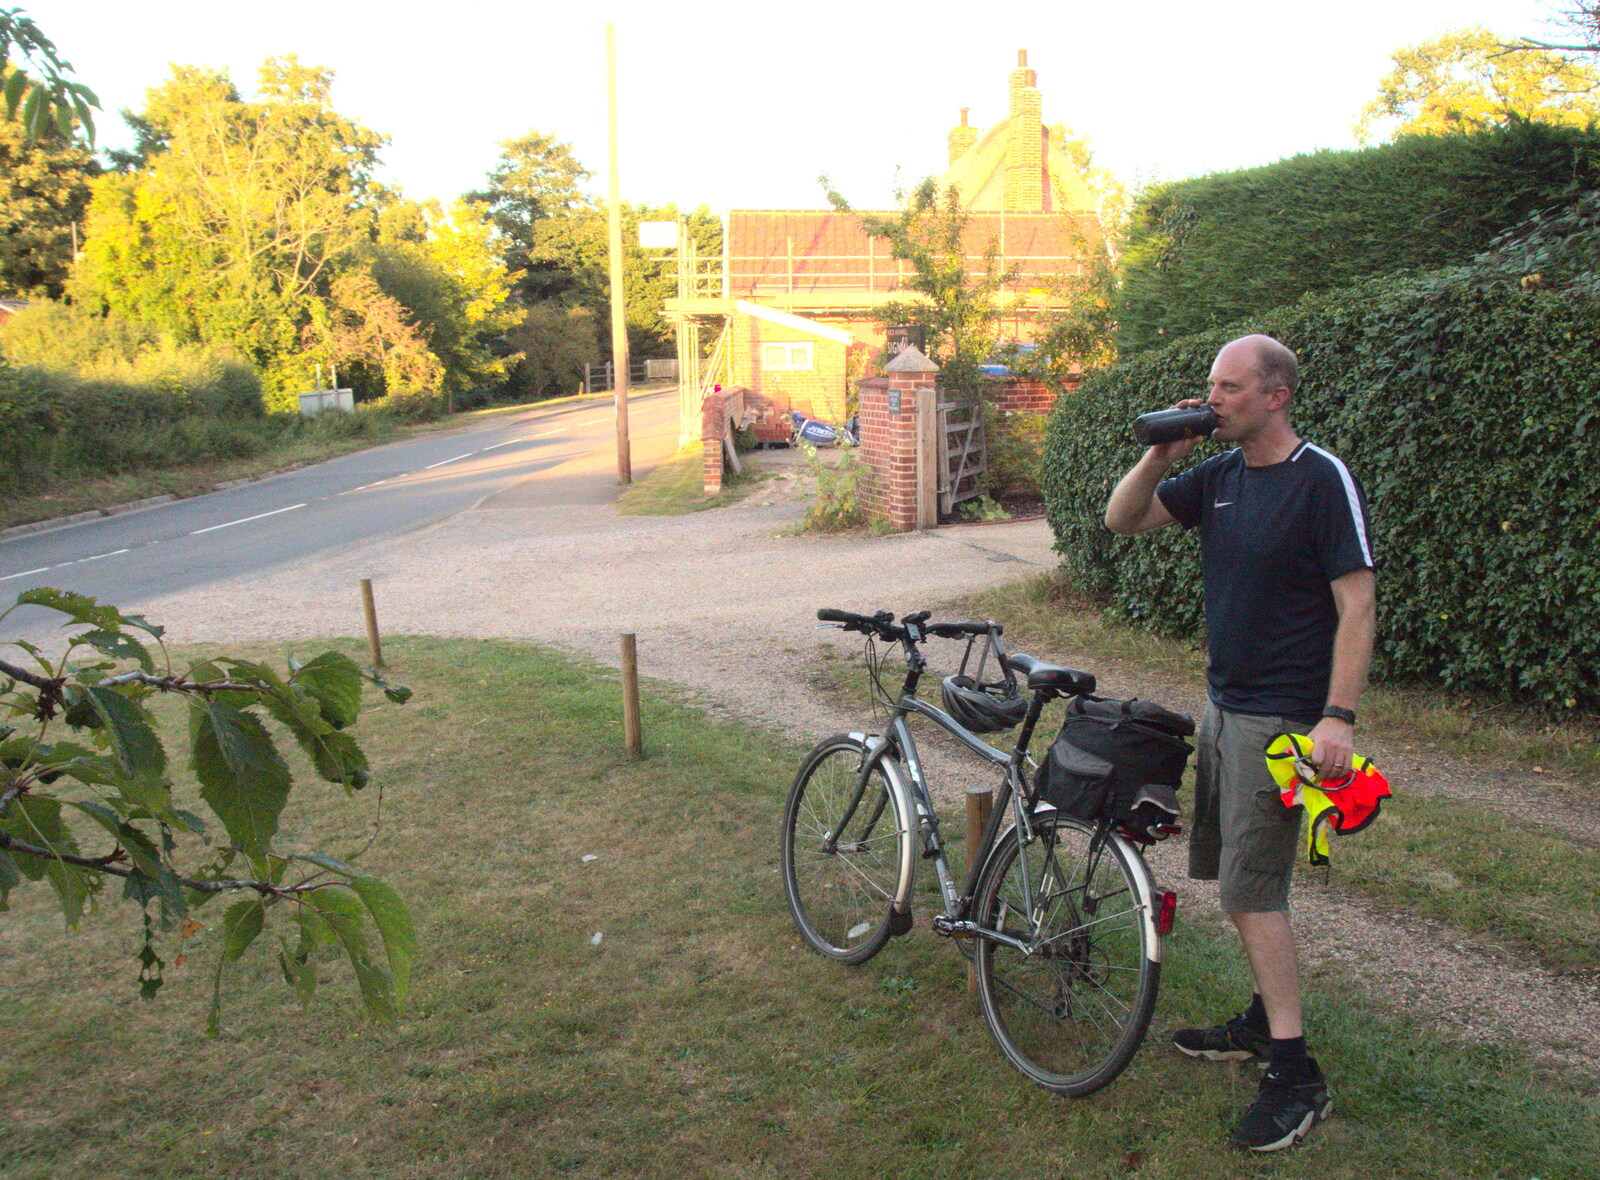 Paul has a swig on something that's not beer from The BSCC at The Earl Soham Victoria and Station 119, Eye, Suffolk - 6th August 2020